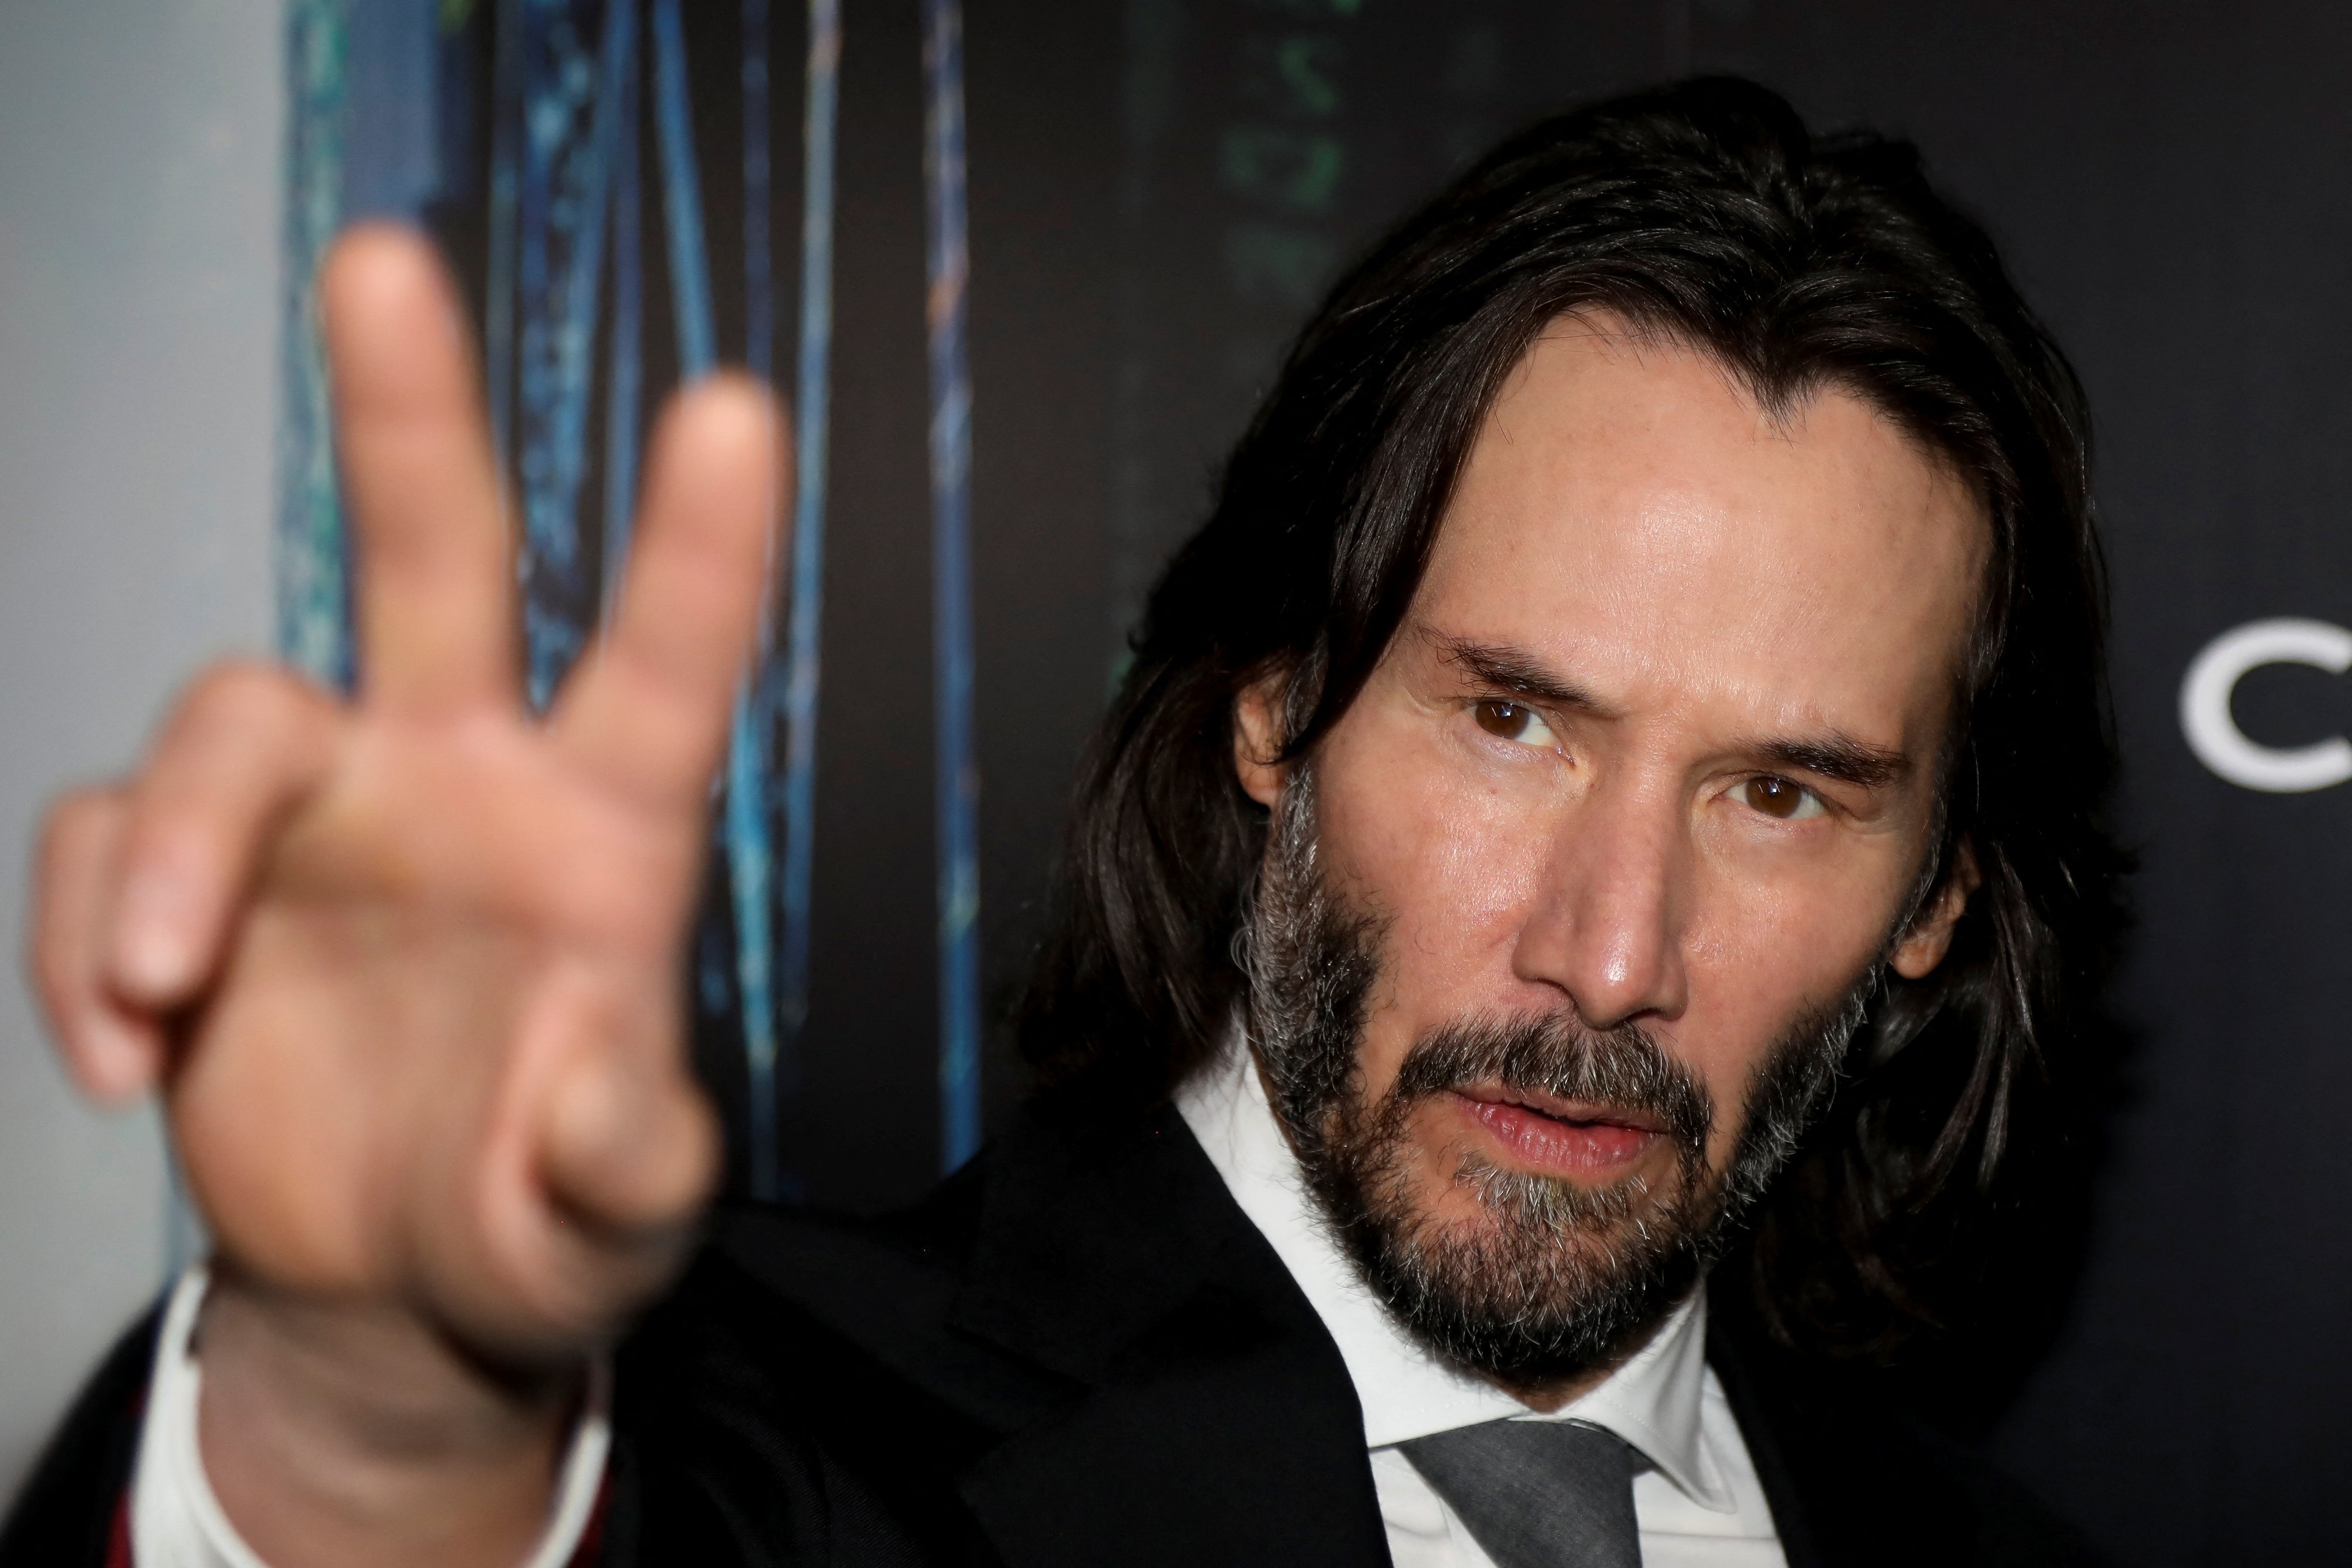 Actor Keanu Reeves during the Canadian premiere of The Matrix Resurrections film on 16 December 2021